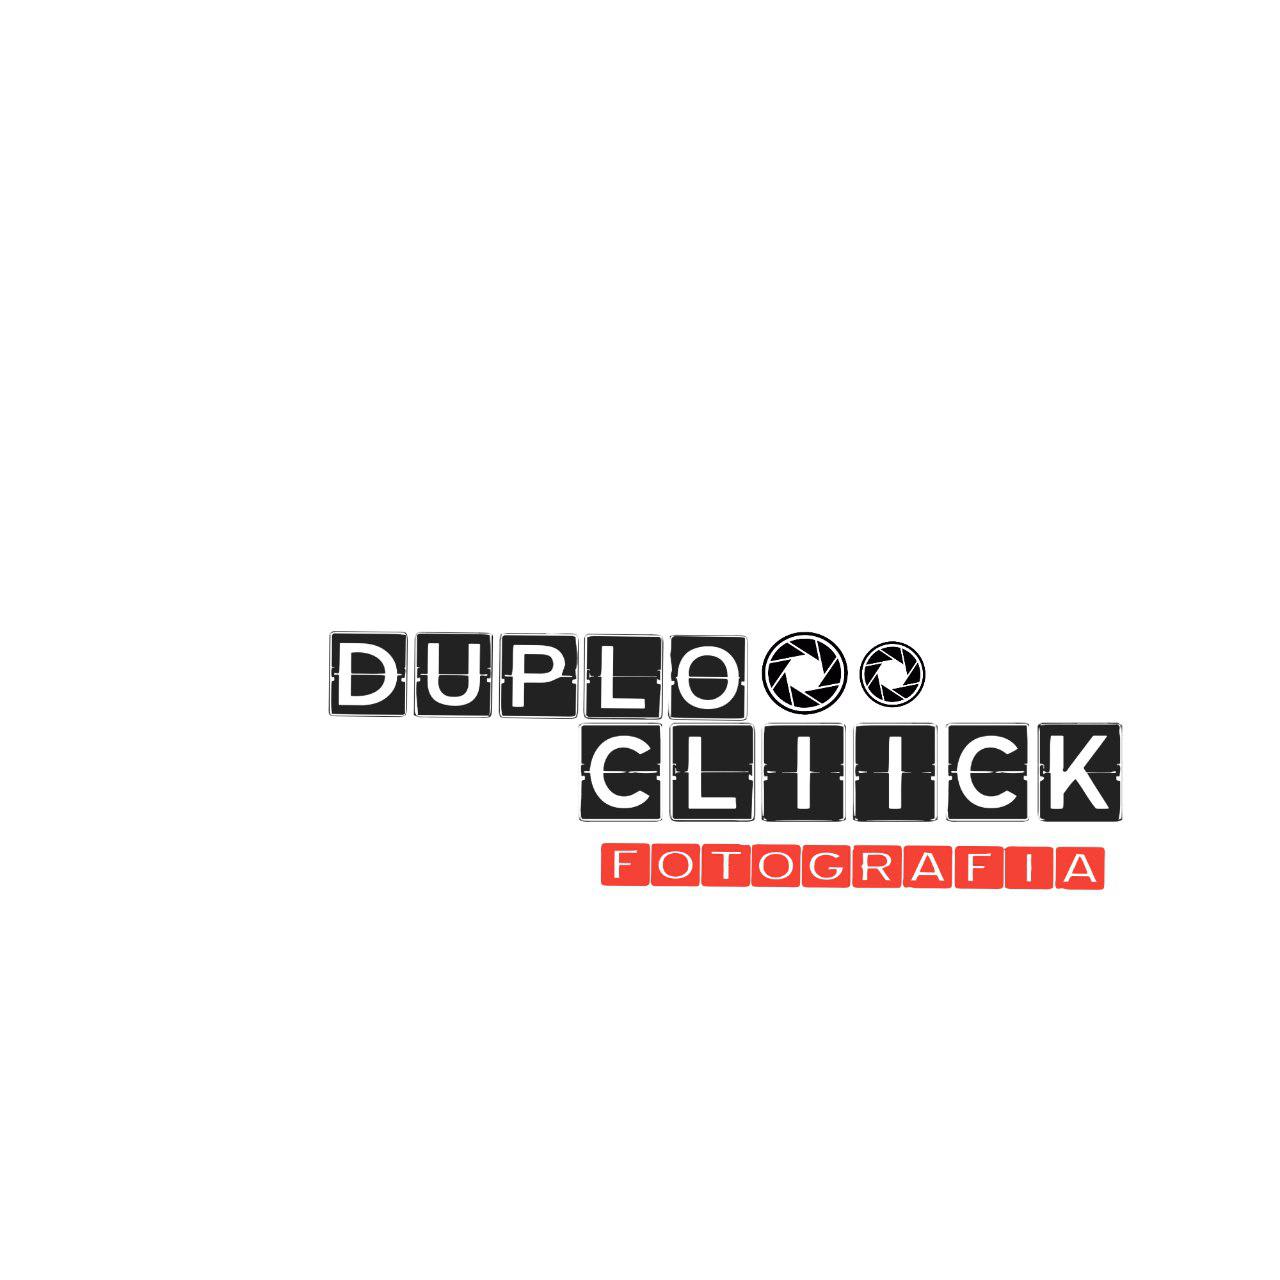 Duplo Cliick